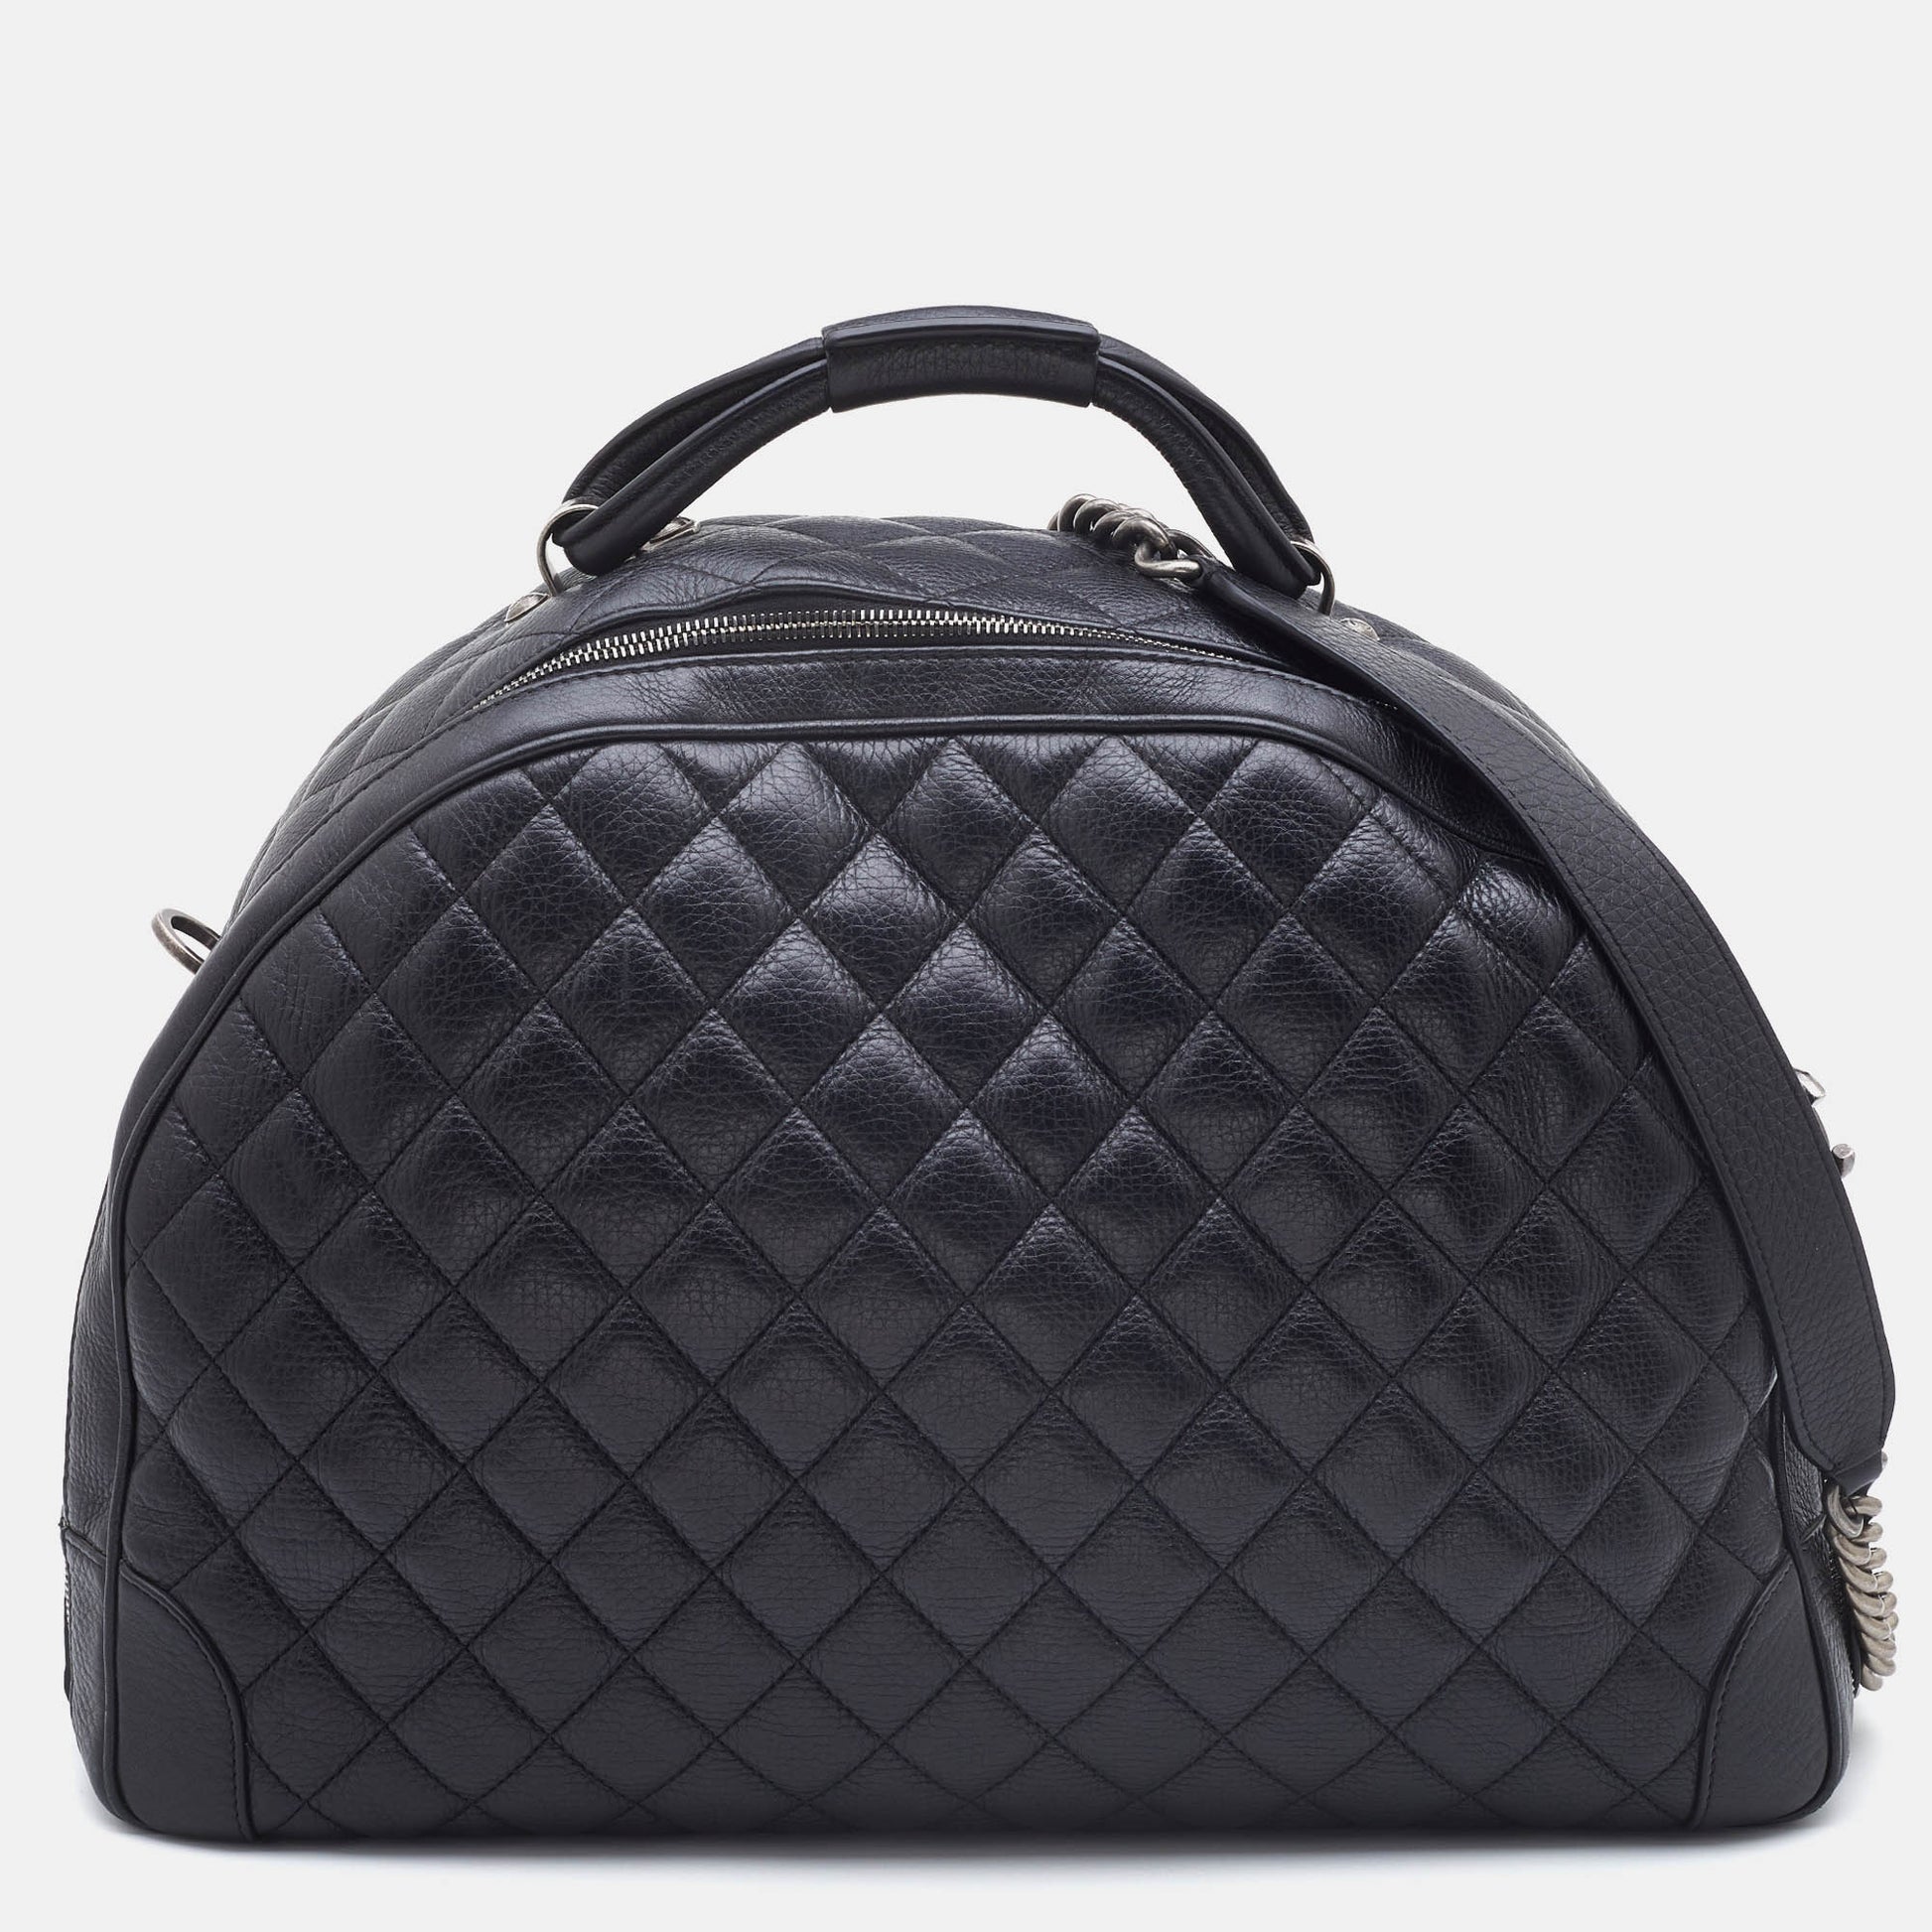 CHANEL Black Quilted Leather Large Airlines Round Trip Bag